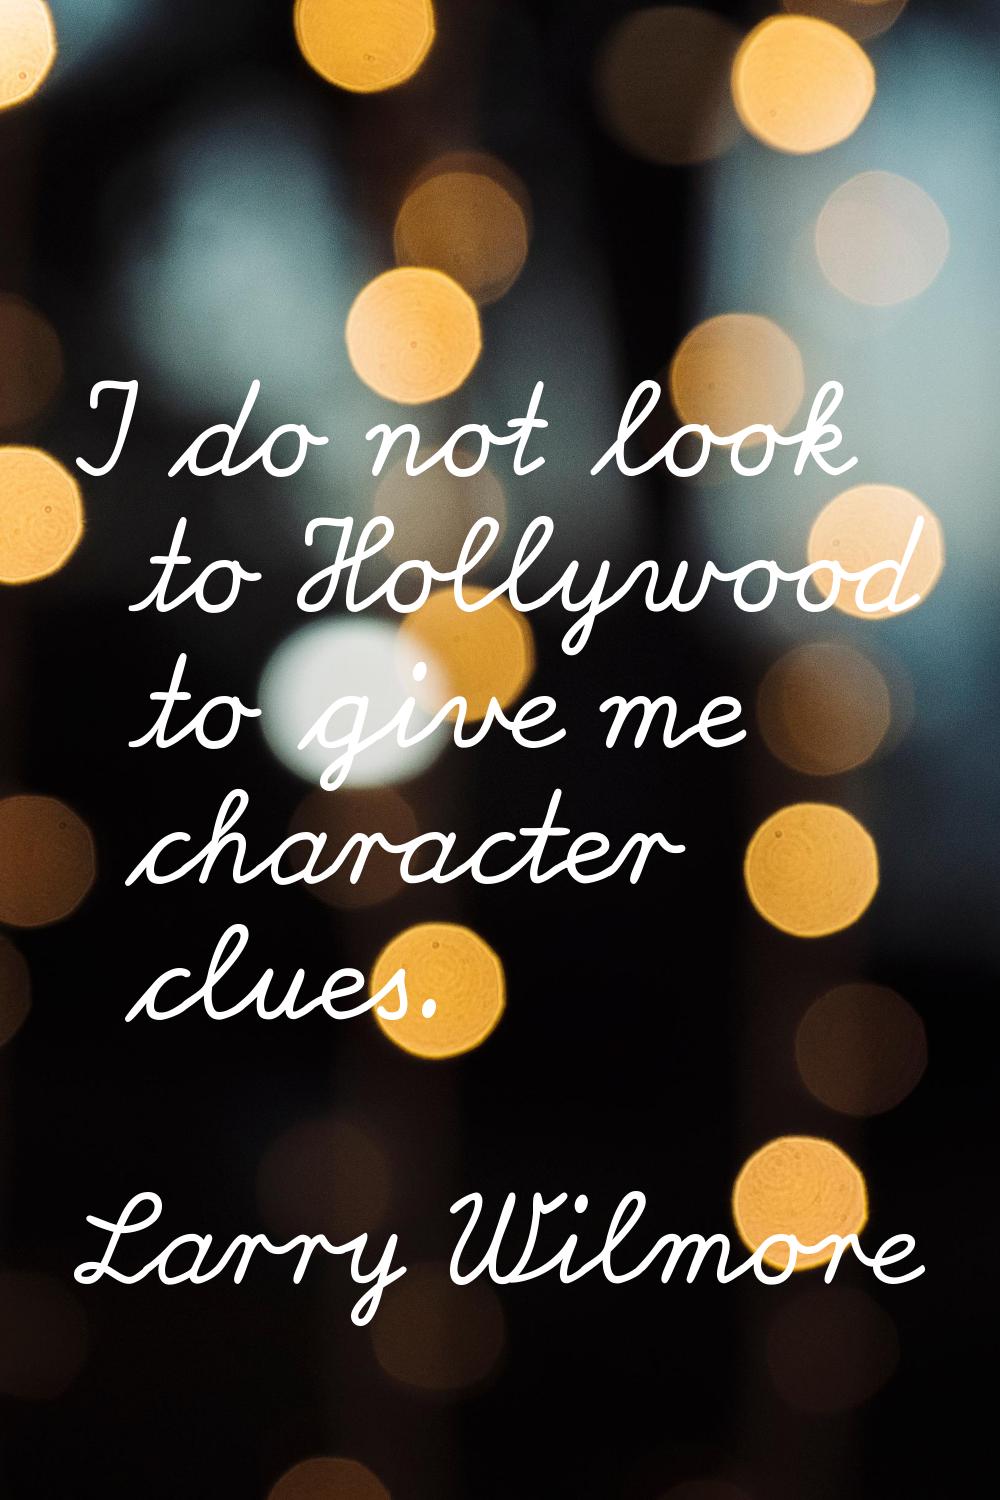 I do not look to Hollywood to give me character clues.